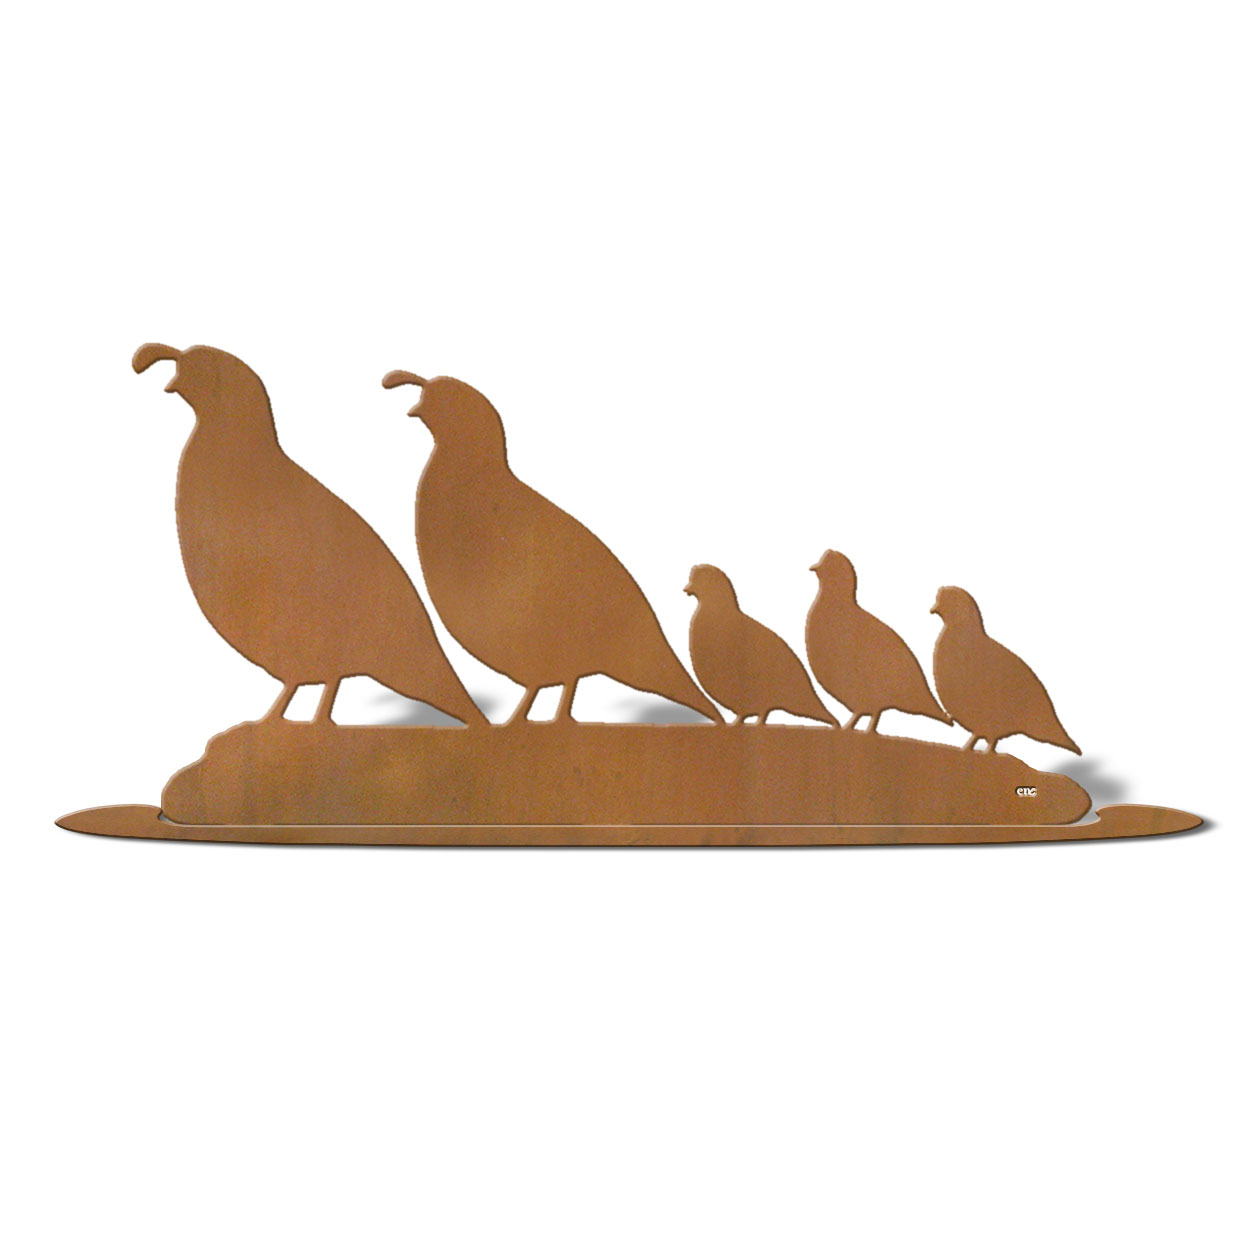 623055r - Tabletop Art - 19in x 10in - Quail Family - Rust Patina